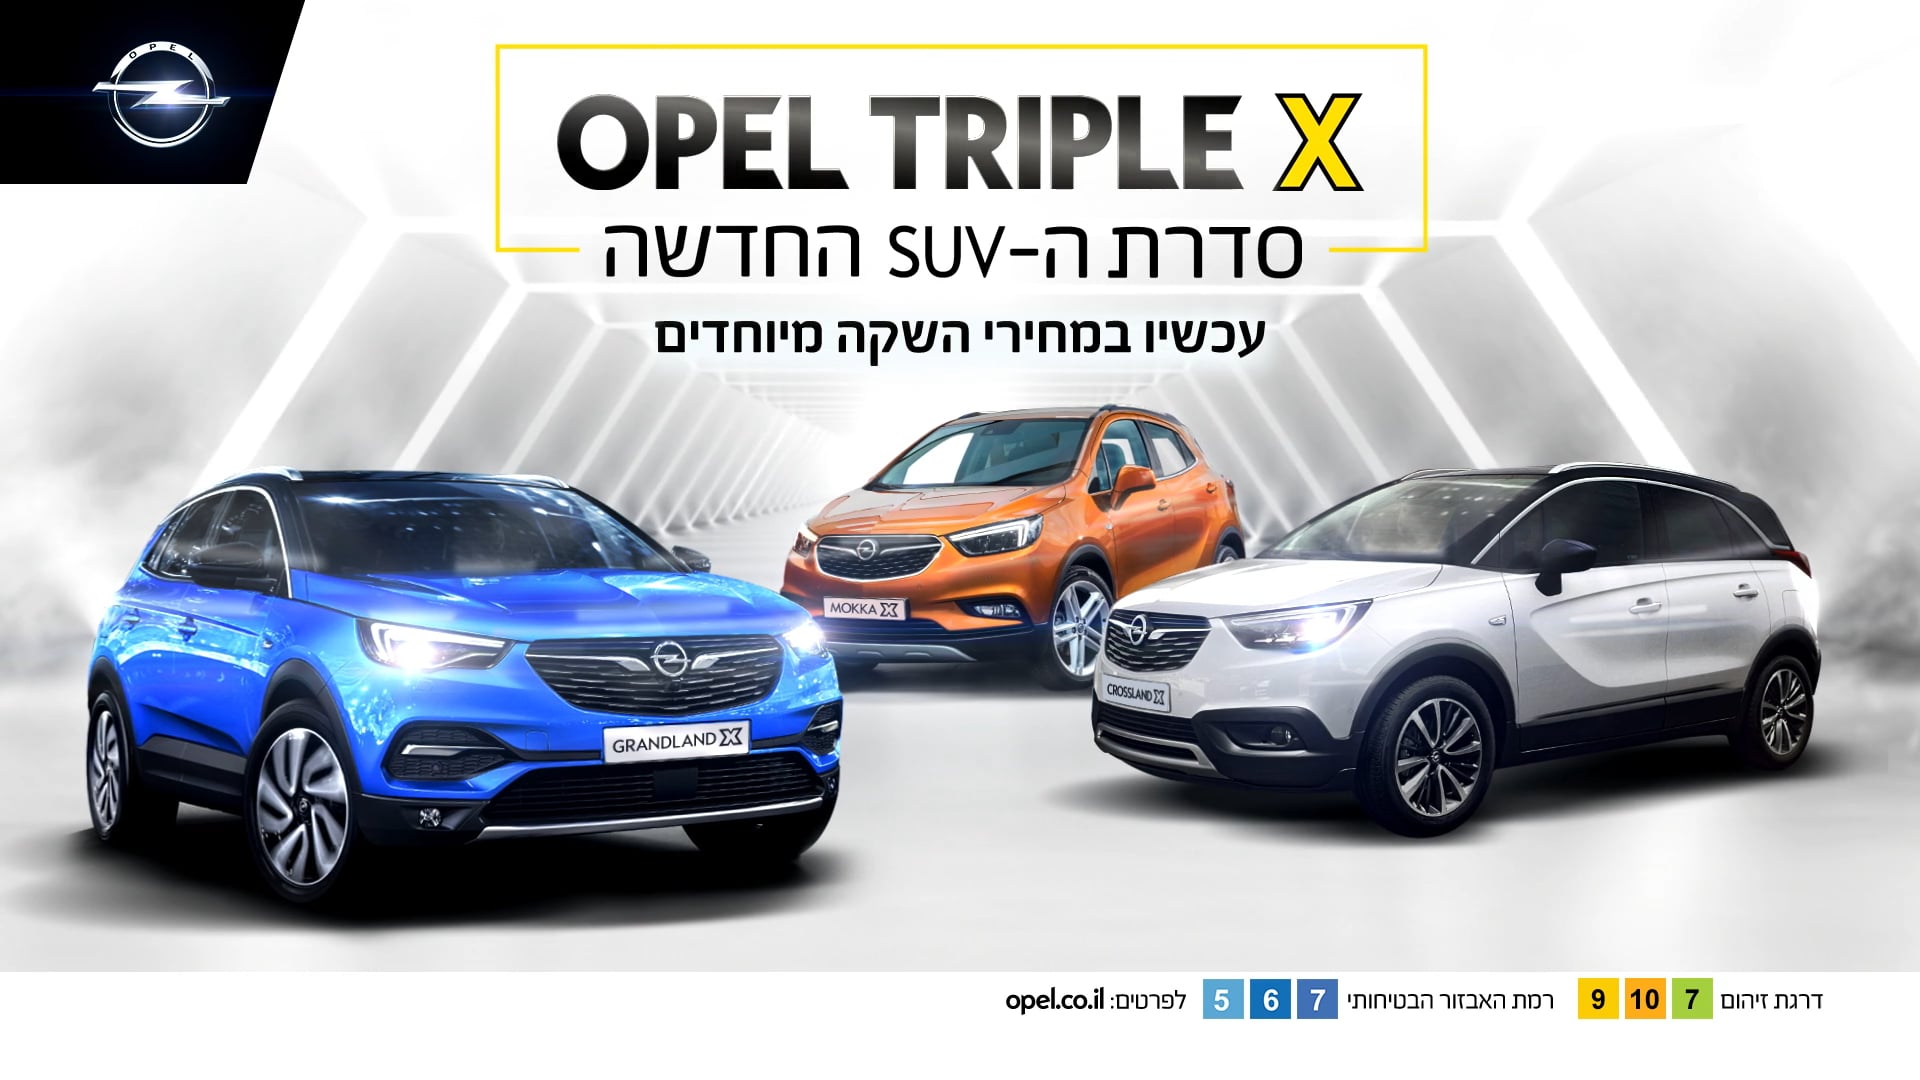 Opel Triple X  - Mad About You